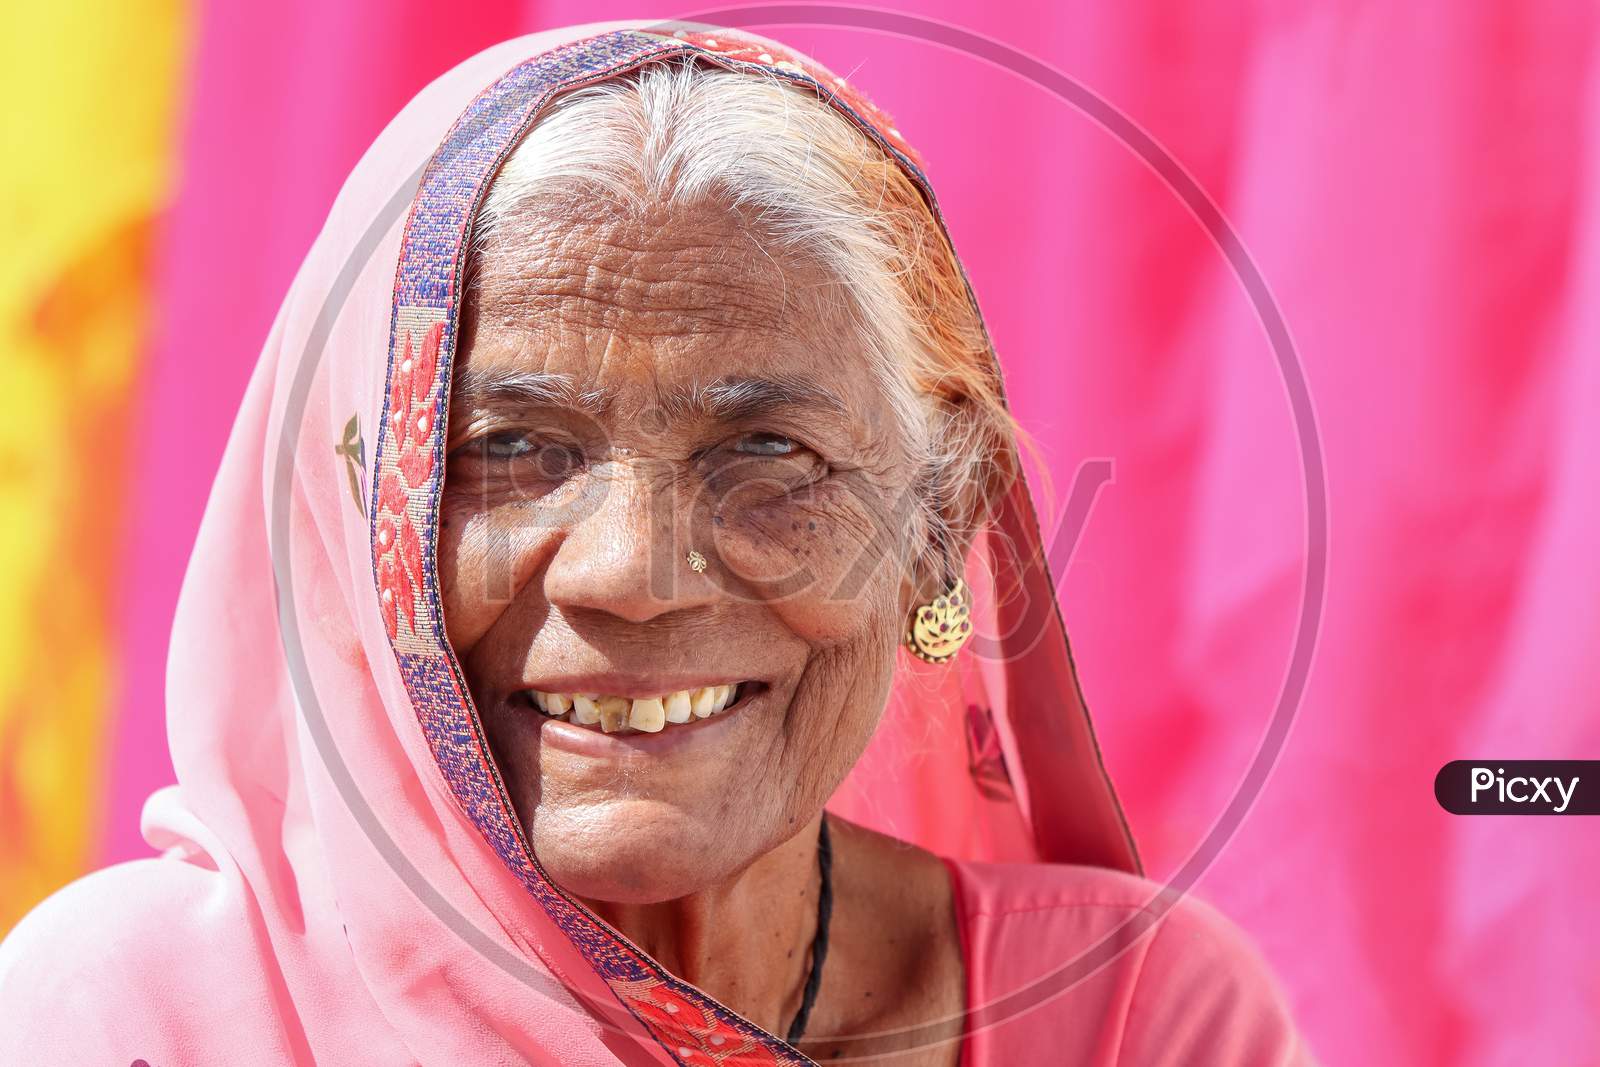 Old Lady Woman Of The Rural Area Of India, Mother, Nanny, And Grandmother, People Live In The Village Of The India And Indian Culture.